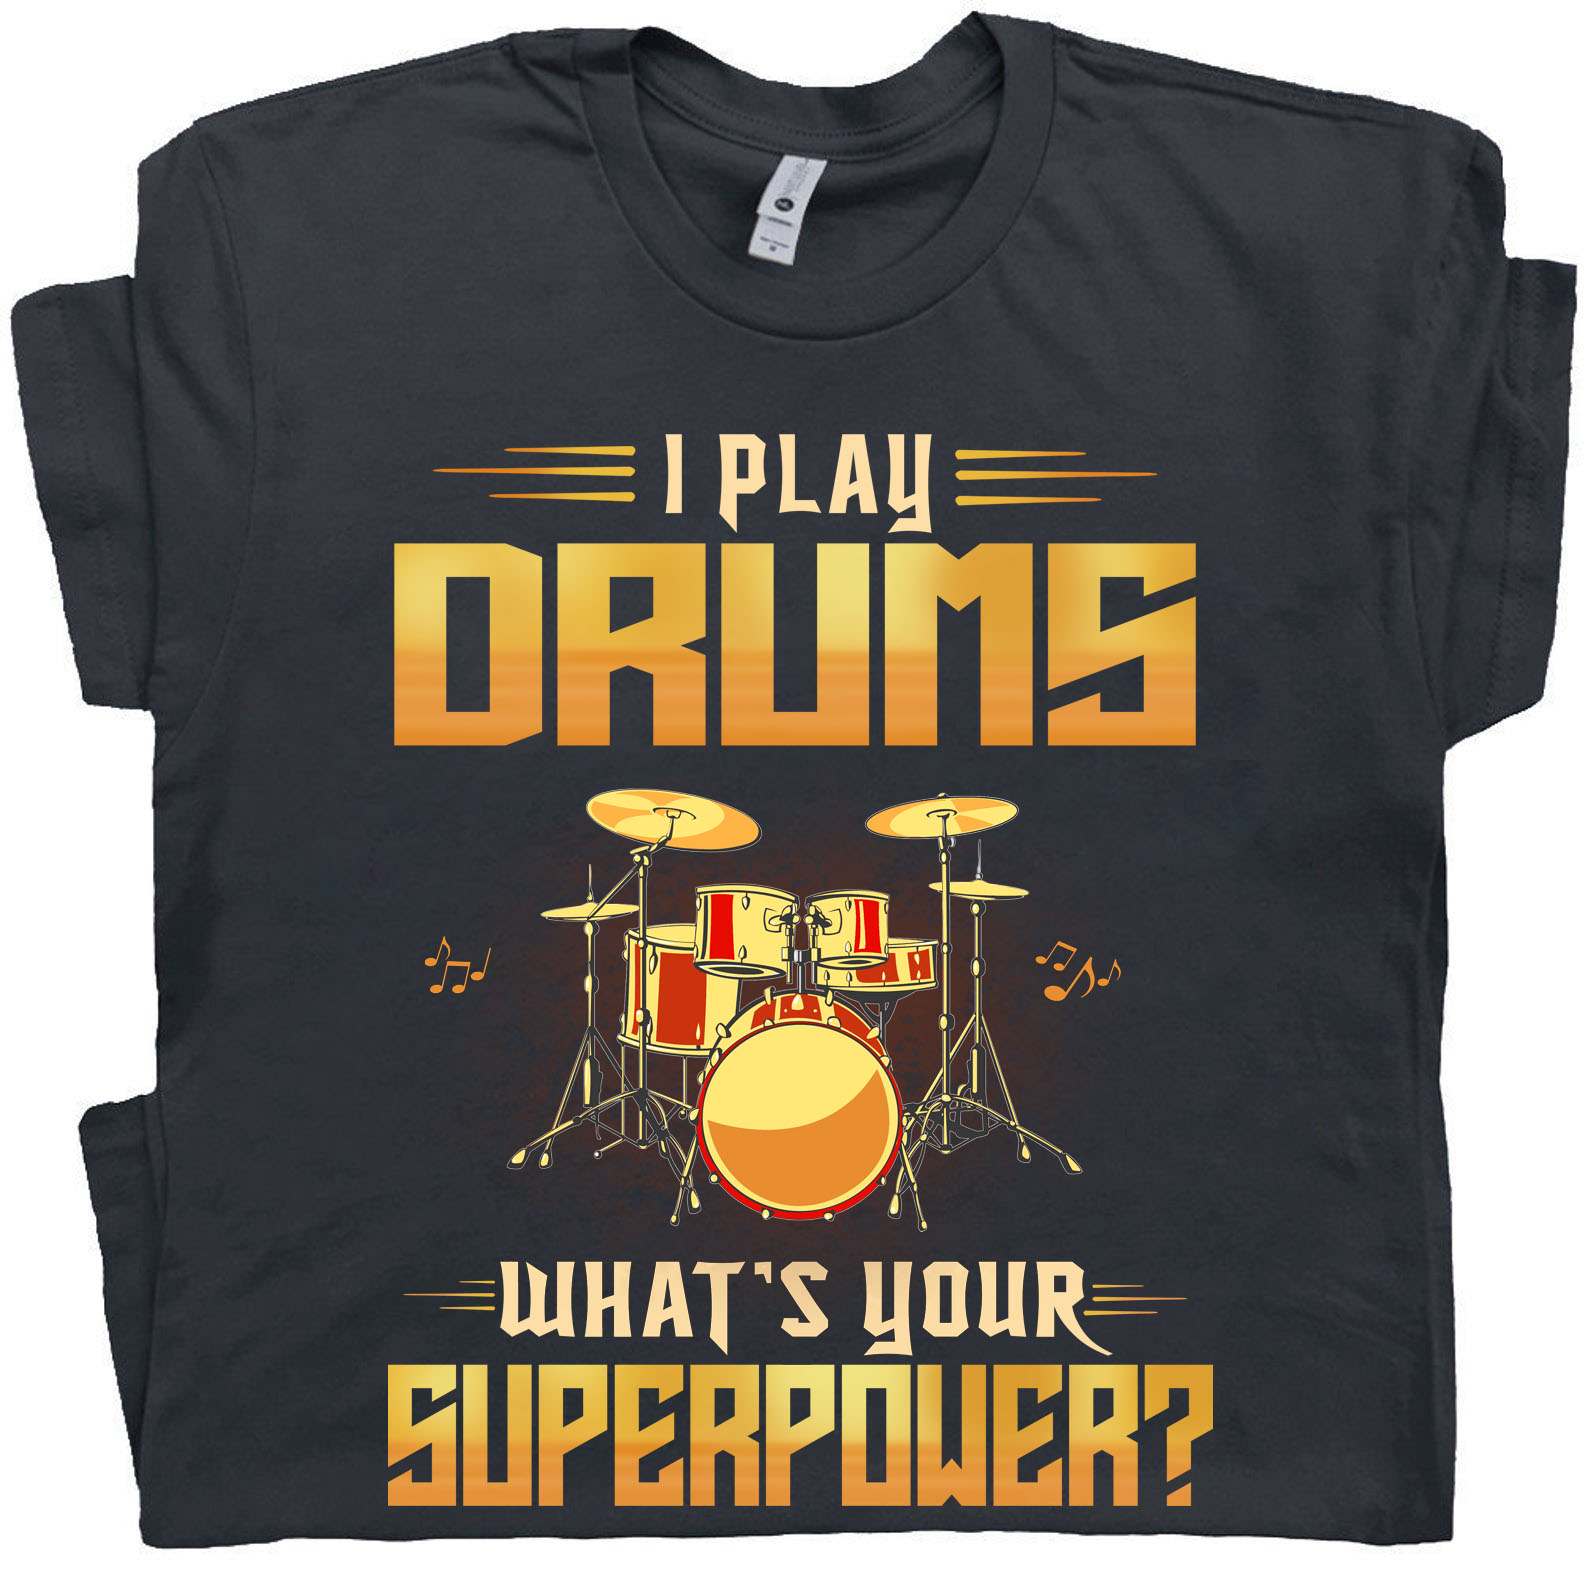 I play drums what's your superpower - The drummer, love playing drum